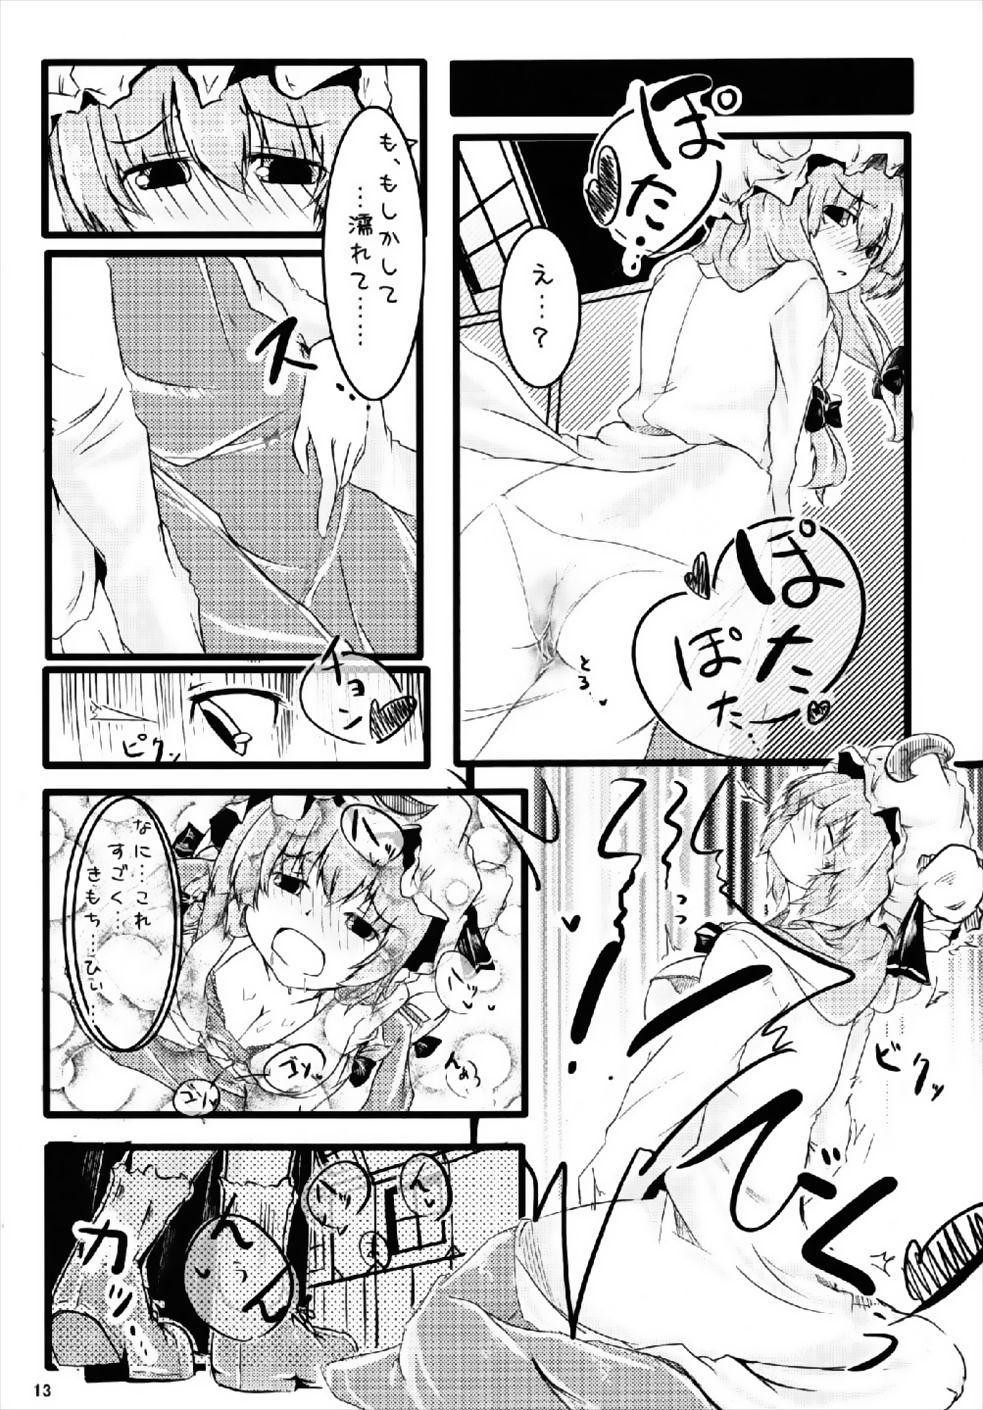 Toilet RemiFlaPatche! - Touhou project Teamskeet - Page 12